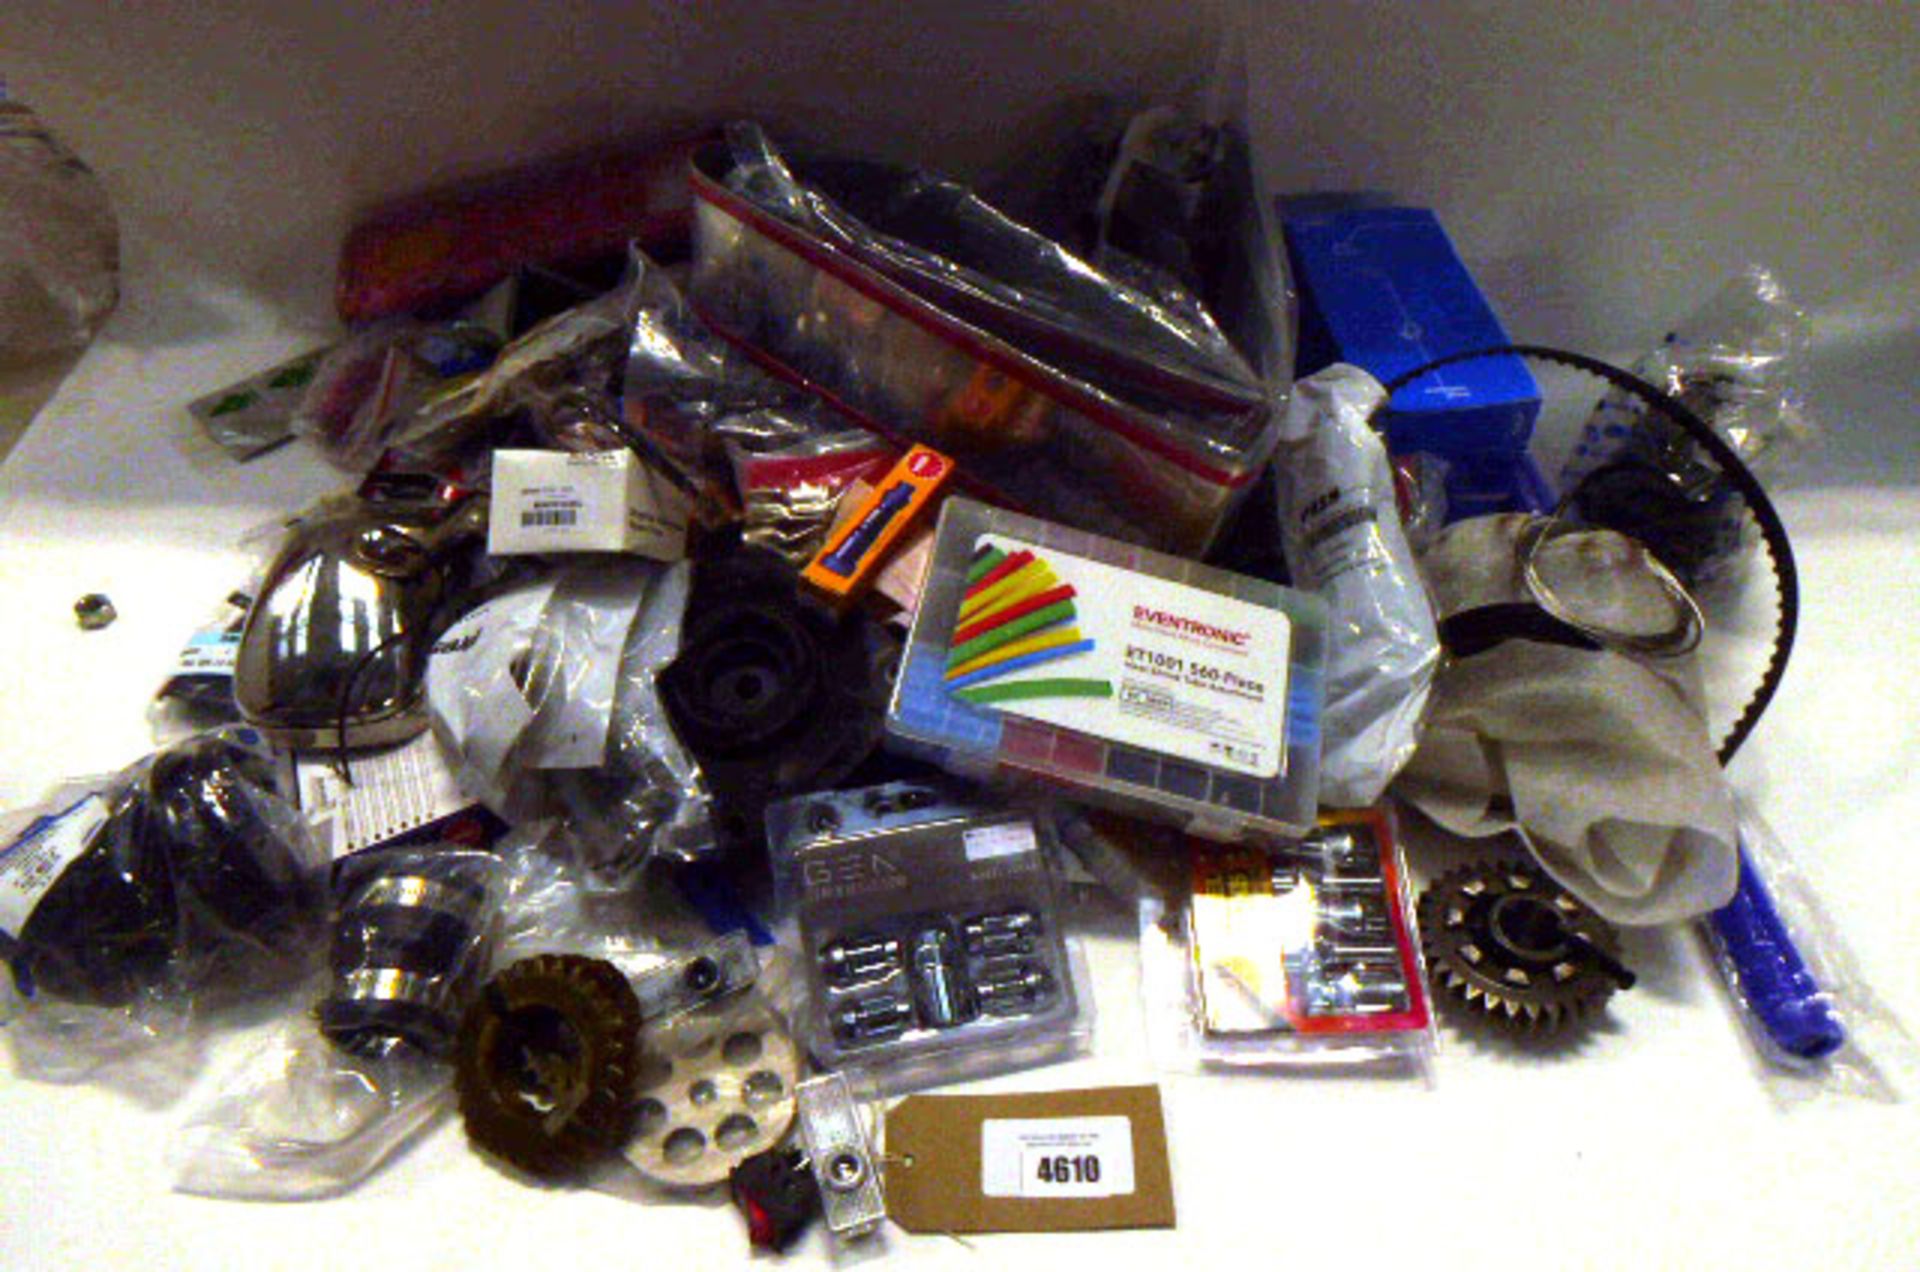 Bag containing wheel bolts, wheel nuts, cogs, hoses, lights, lenses, timing belts and other car